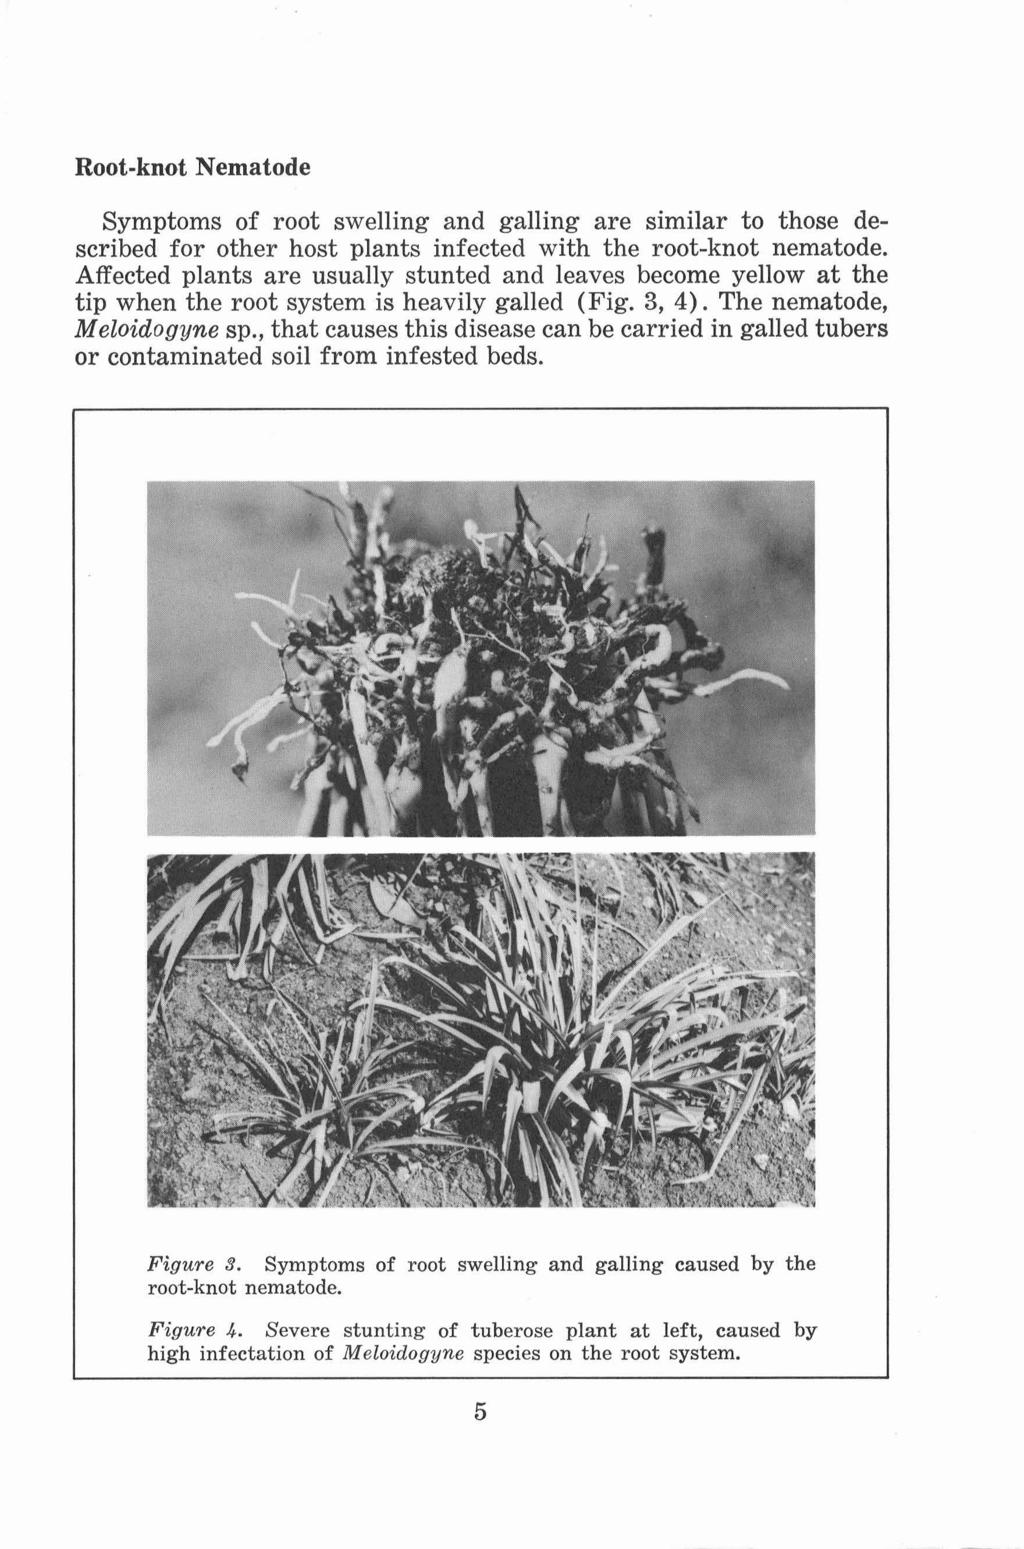 Root-knot Nematode Symptoms of root swelling and galling are similar to those described for other host plants infected with the root-knot nematode.